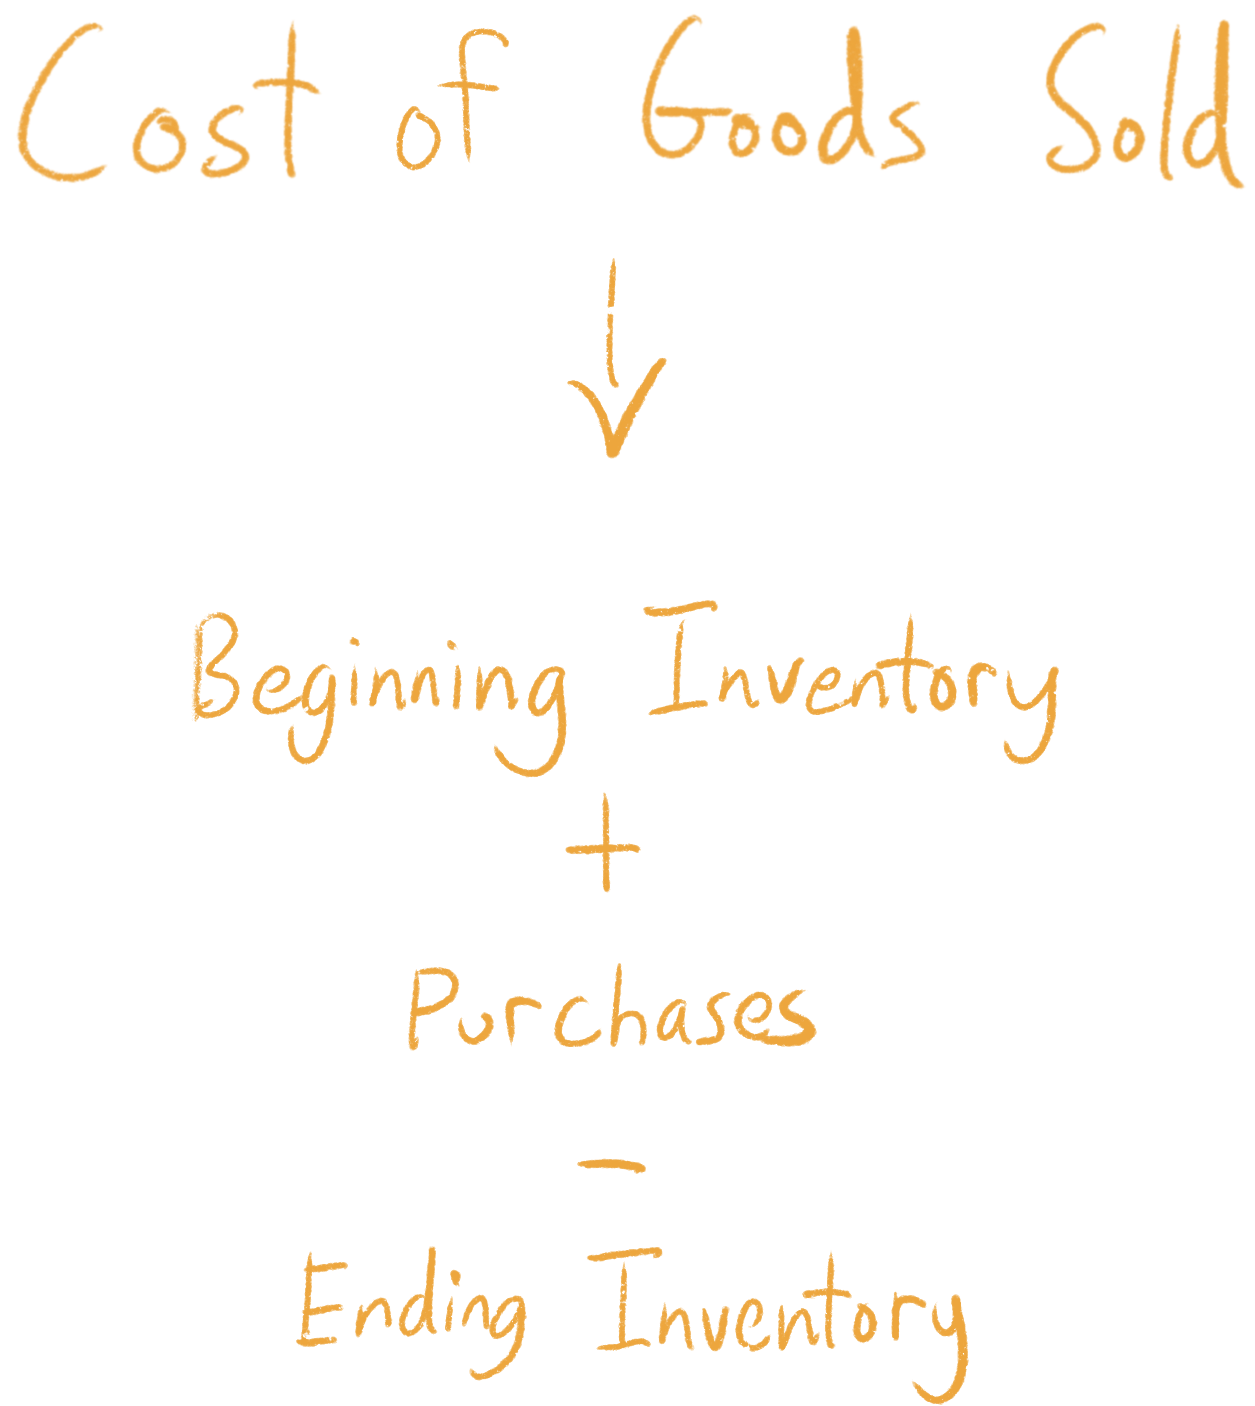 Cost of Goods Sold = Beginning inventory plus Purchases minus Ending inventory